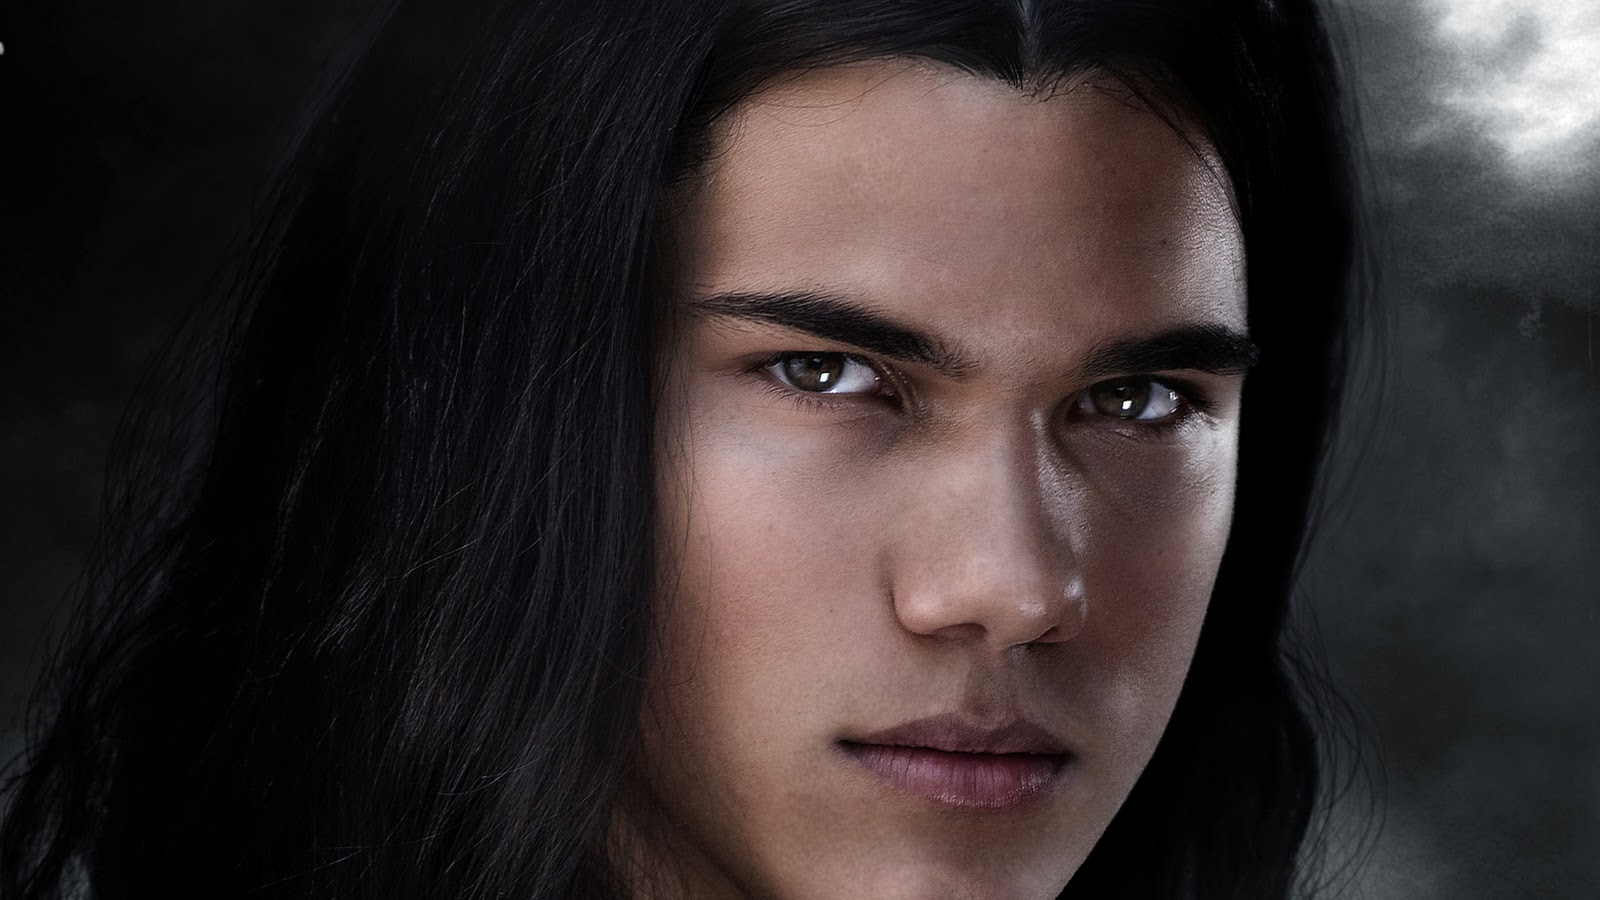 hairstyles for men: Jacob Black - Hairstyles of the Twilight Movies